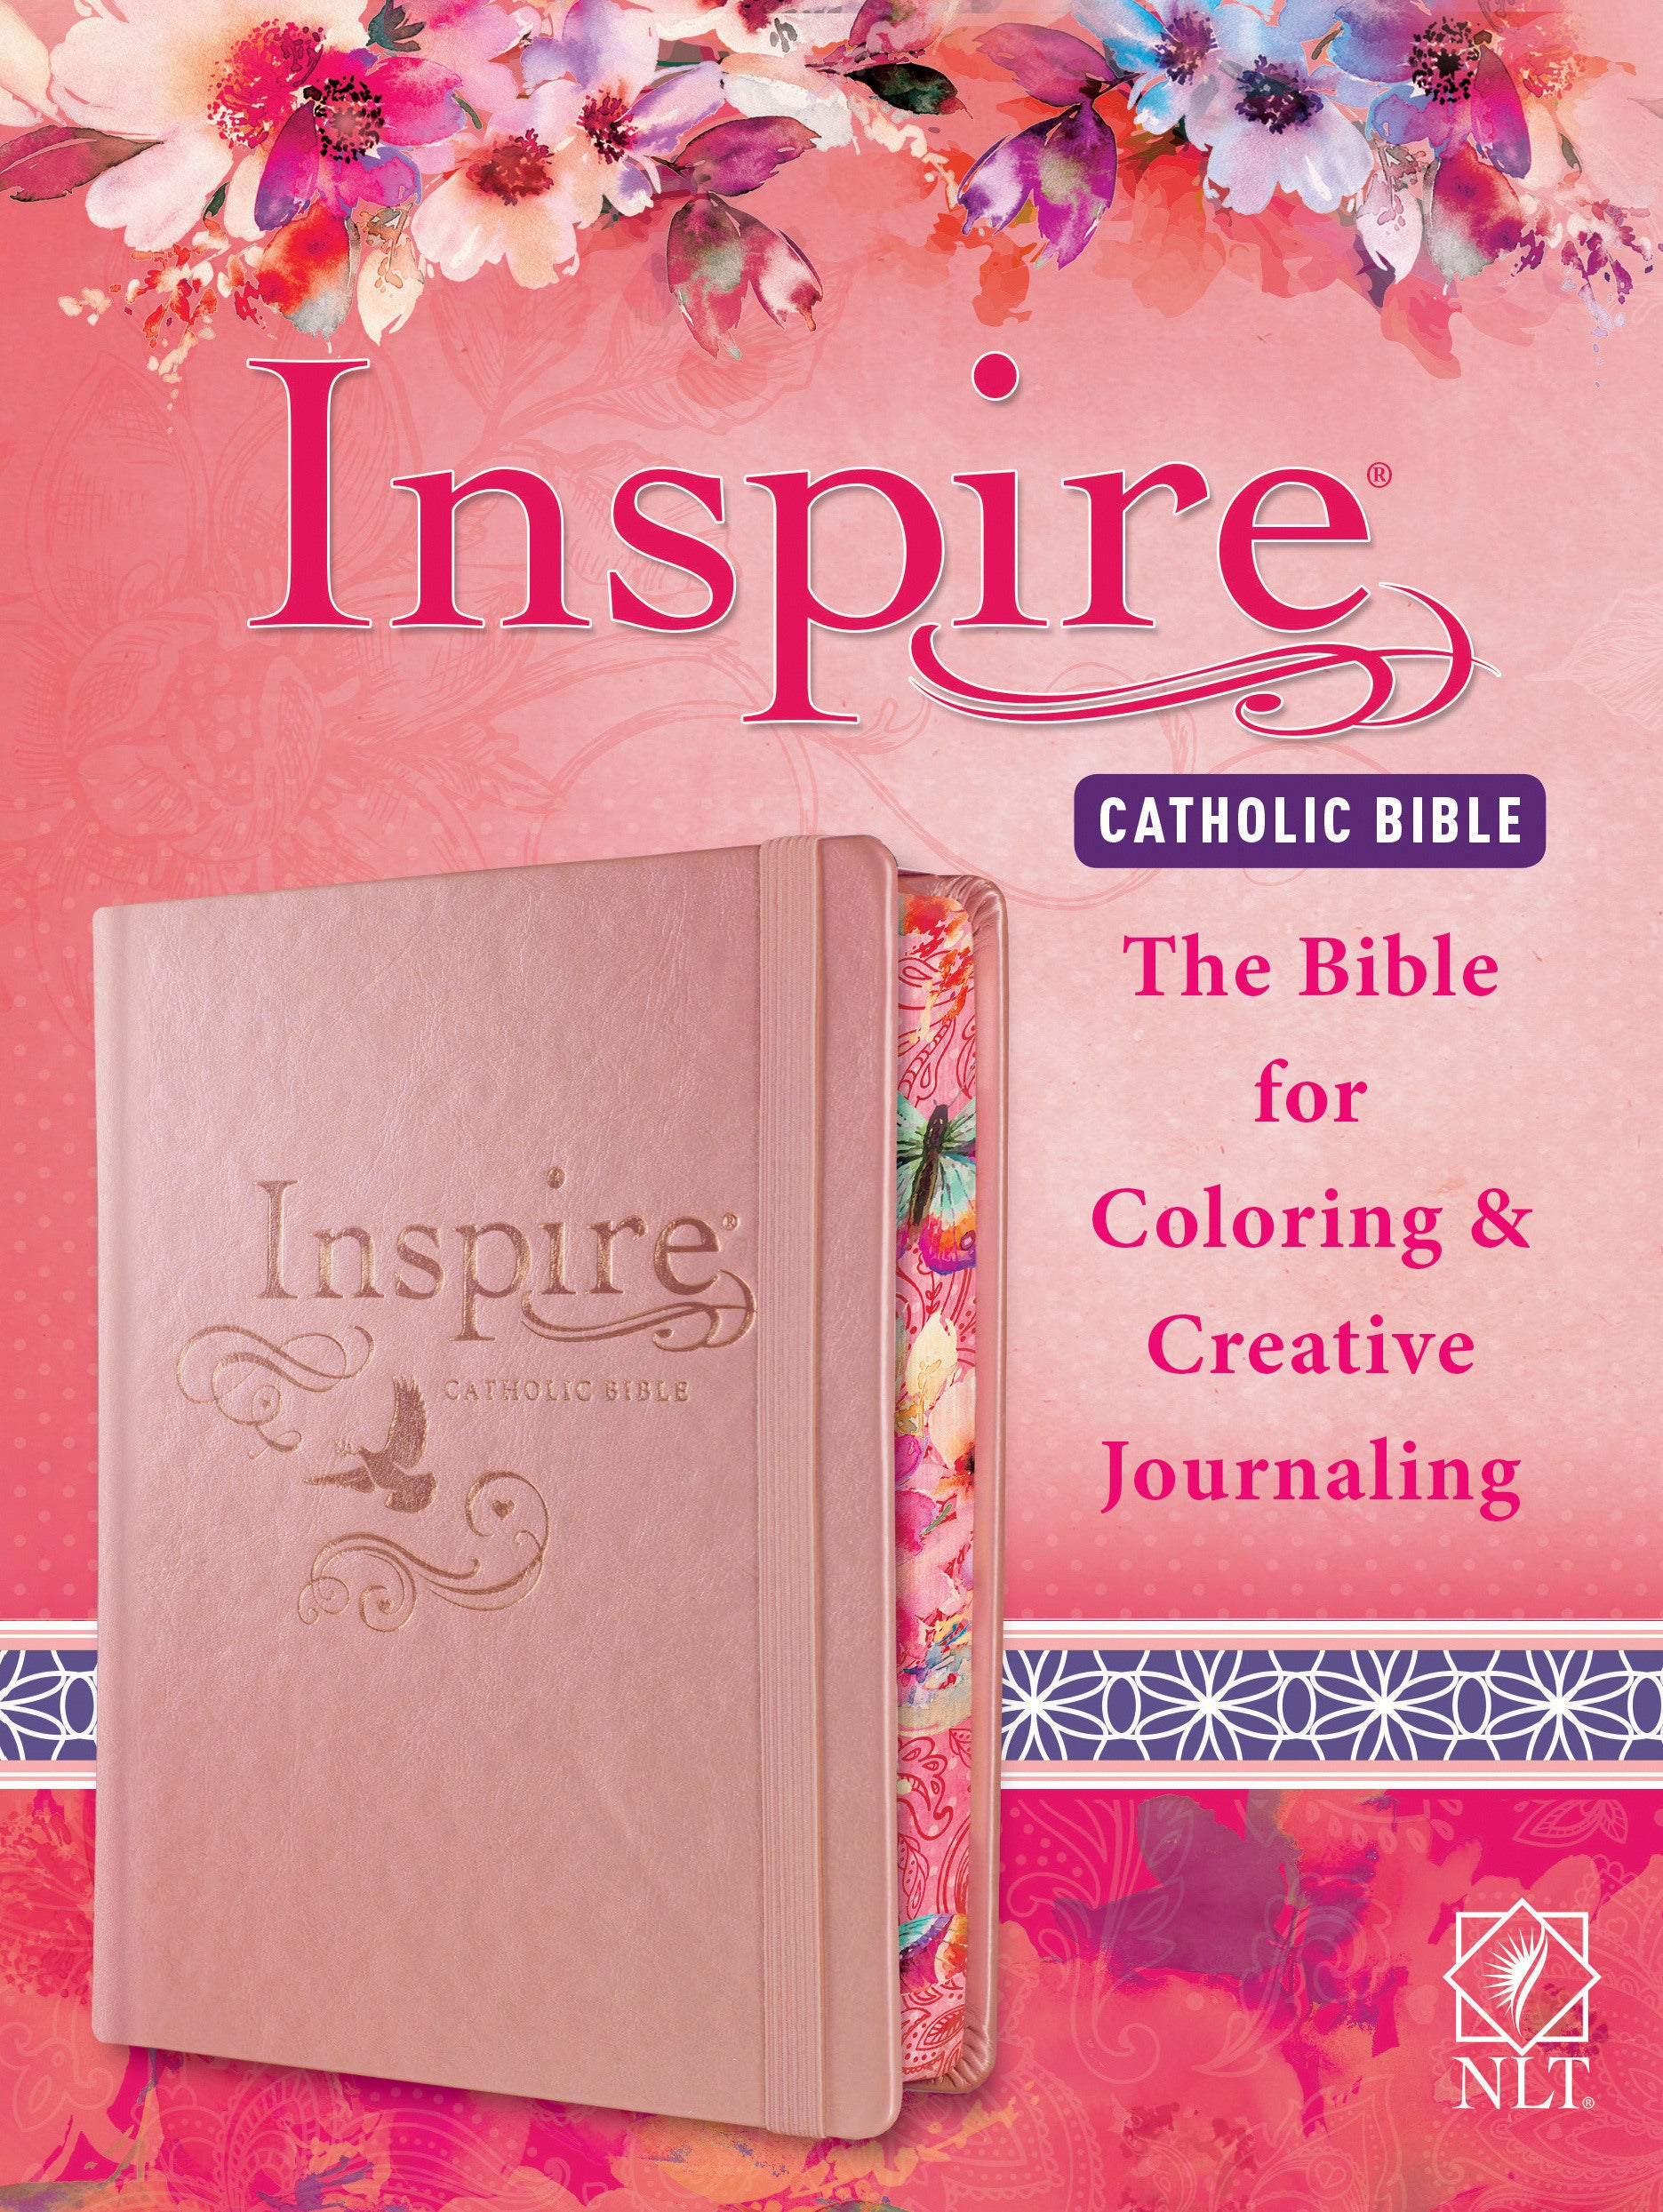 Image of NLT Inspire Catholic Bible, Pink, Imitiation Leather, Colouring, Journaling, Scripture Art, Wide Margins, Gift, Ribbon Marker other